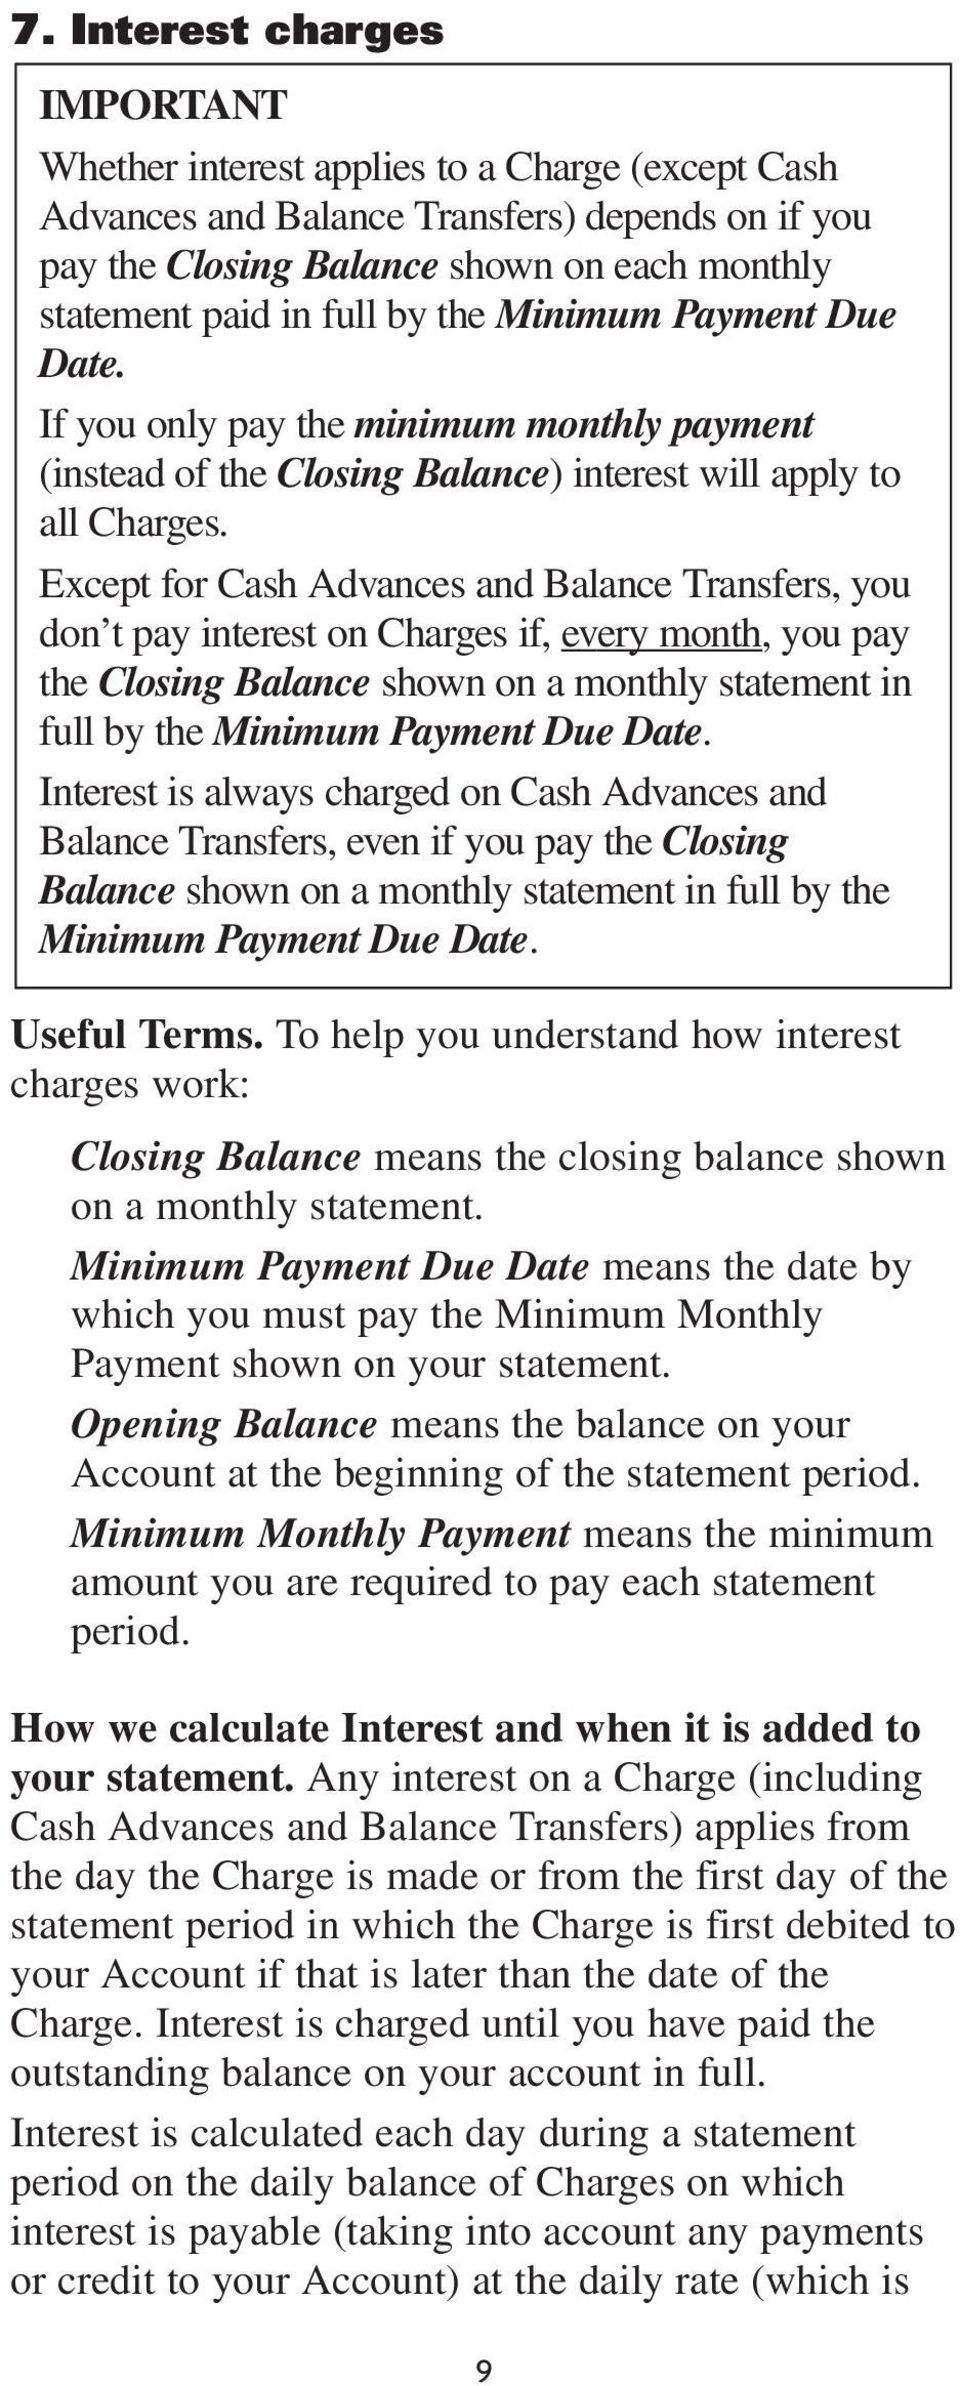 Except for Cash Advances and Balance Transfers, you don t pay interest on Charges if, every month, you pay the Closing Balance shown on a monthly statement in full by the Minimum Payment Due Date.